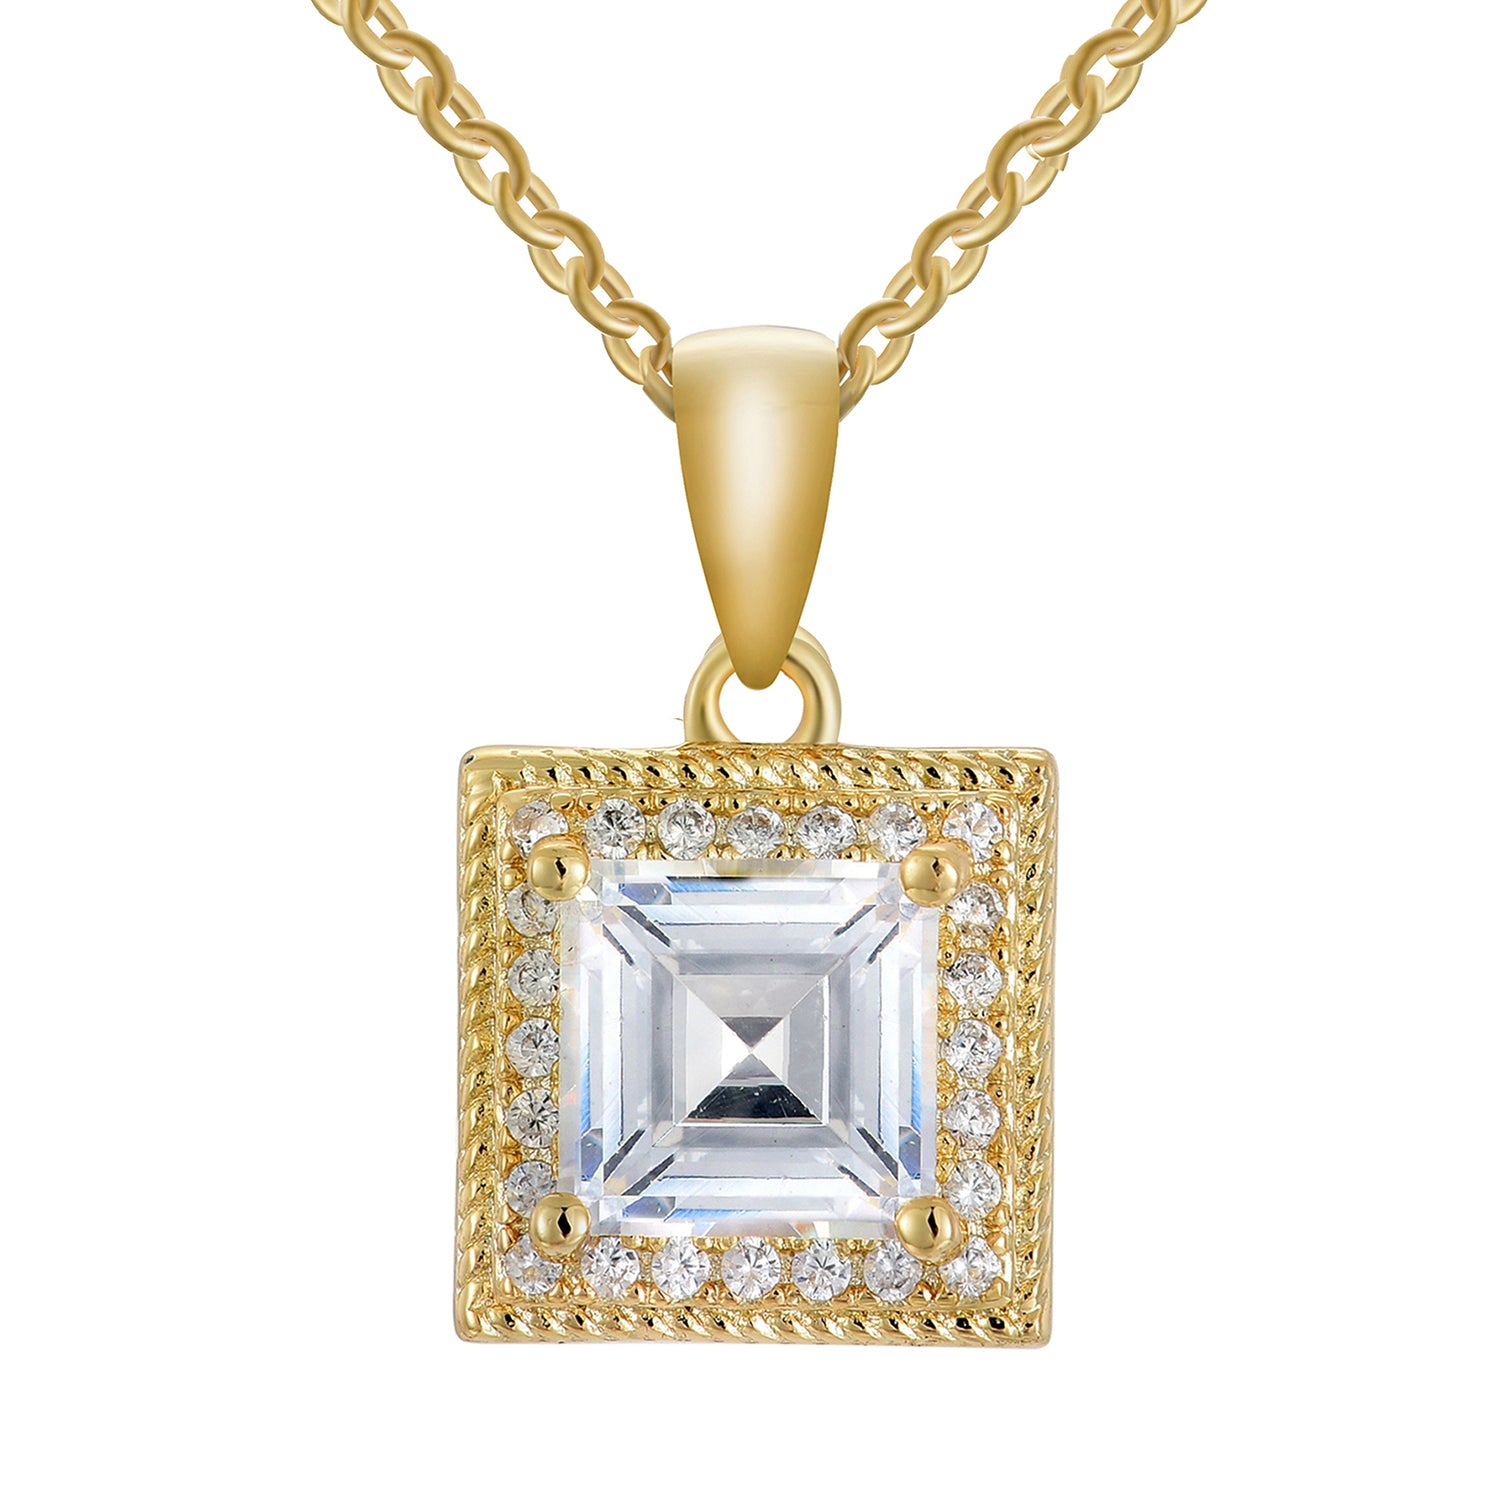 Rebecca 18k White Gold Plated Silver Necklace with Princess Cut Simulated Diamond CZ Crystals